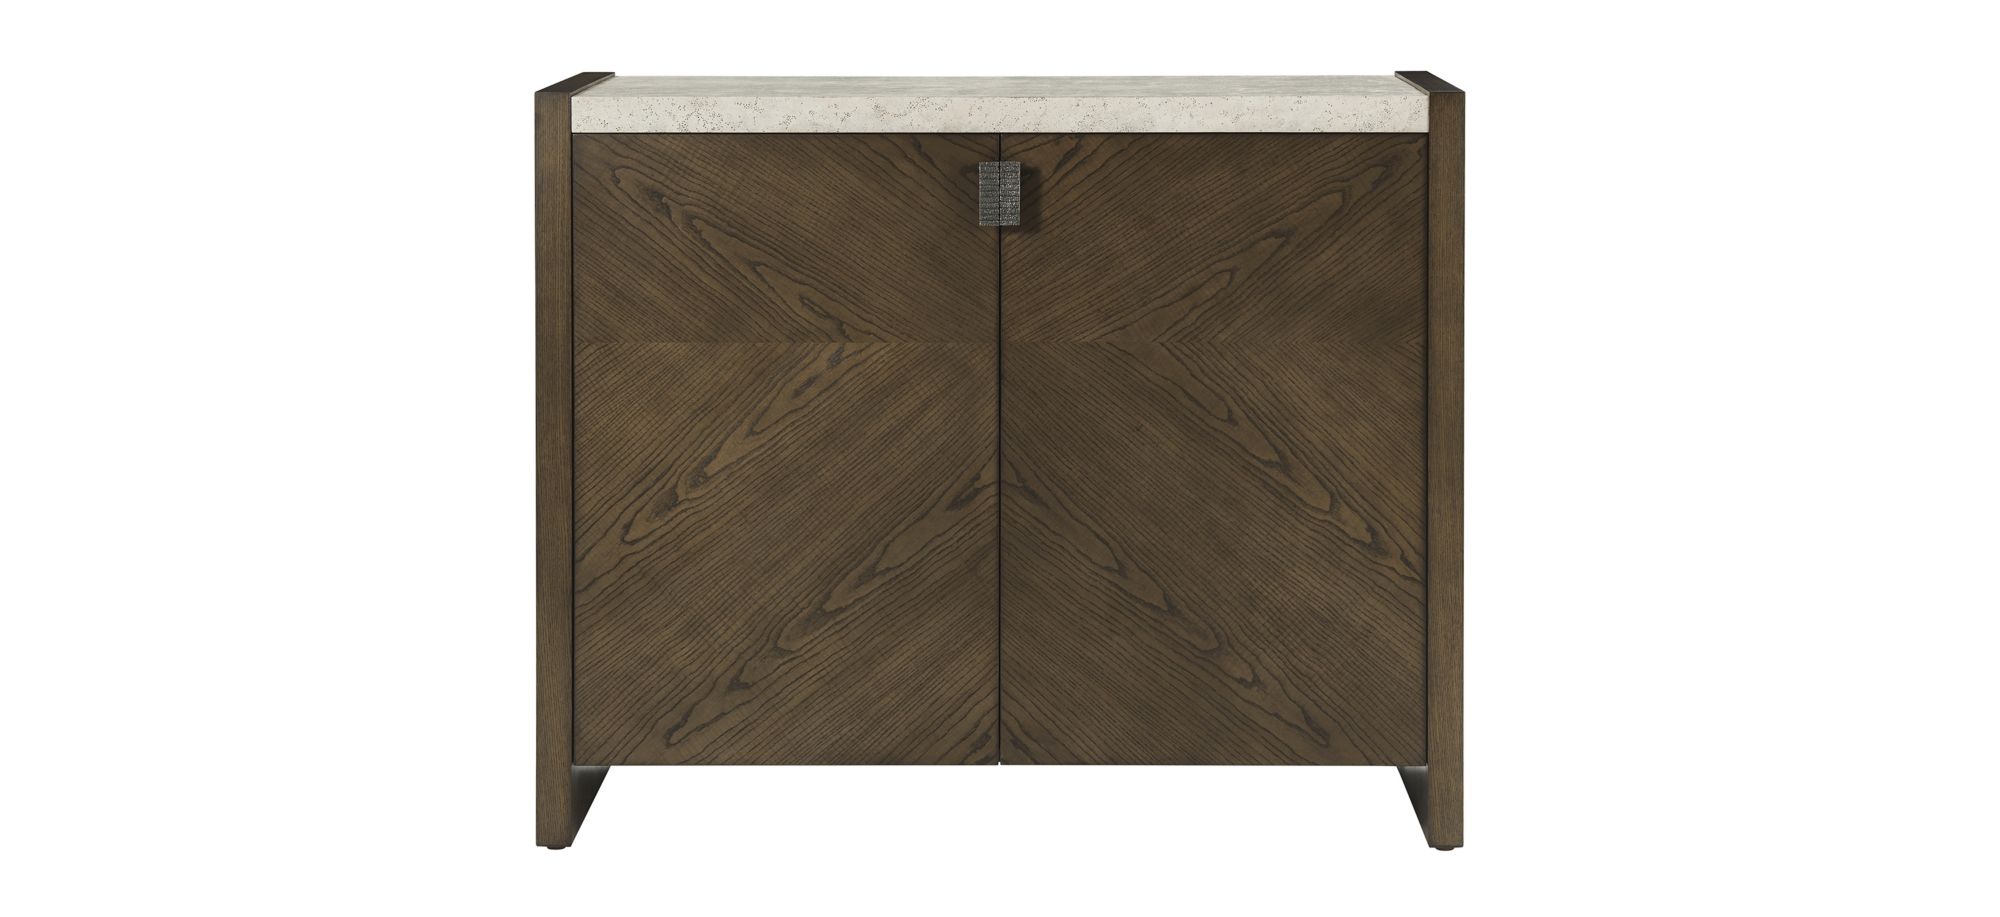 Catalina Hall Chest in Earth by Theodore Alexander